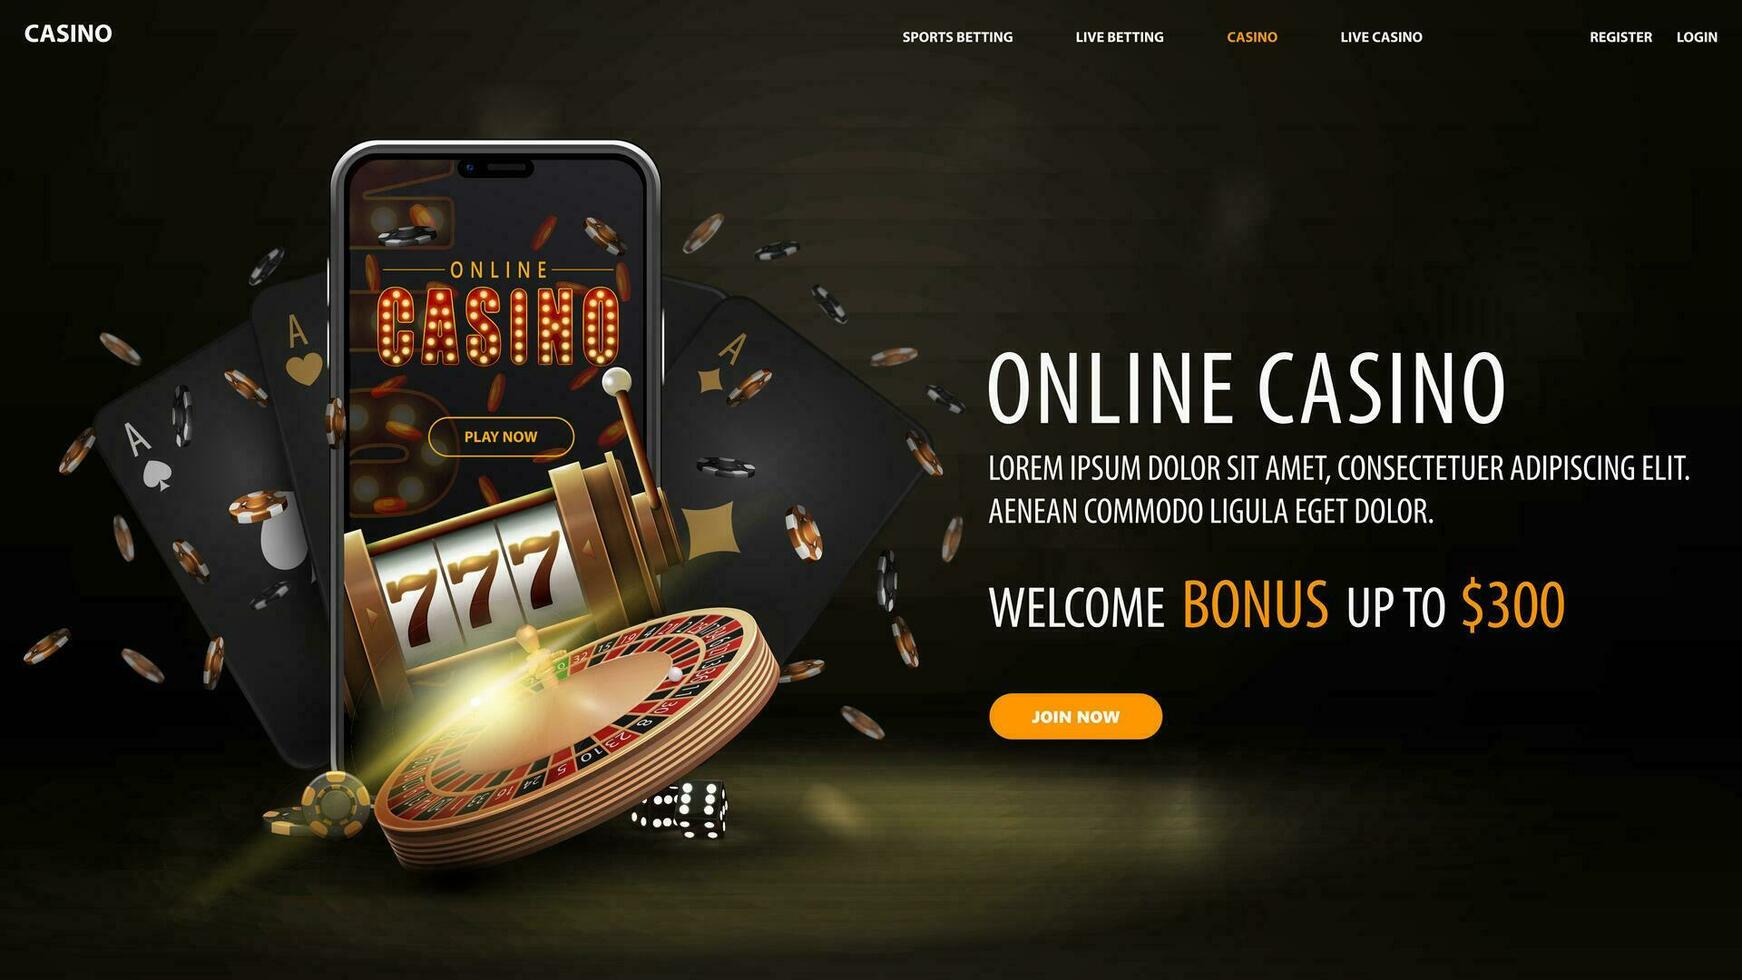 Online casino, black and gold web banner with offer, smartphone, slot machine, Casino Roulette, poker chips and playing cards. vector